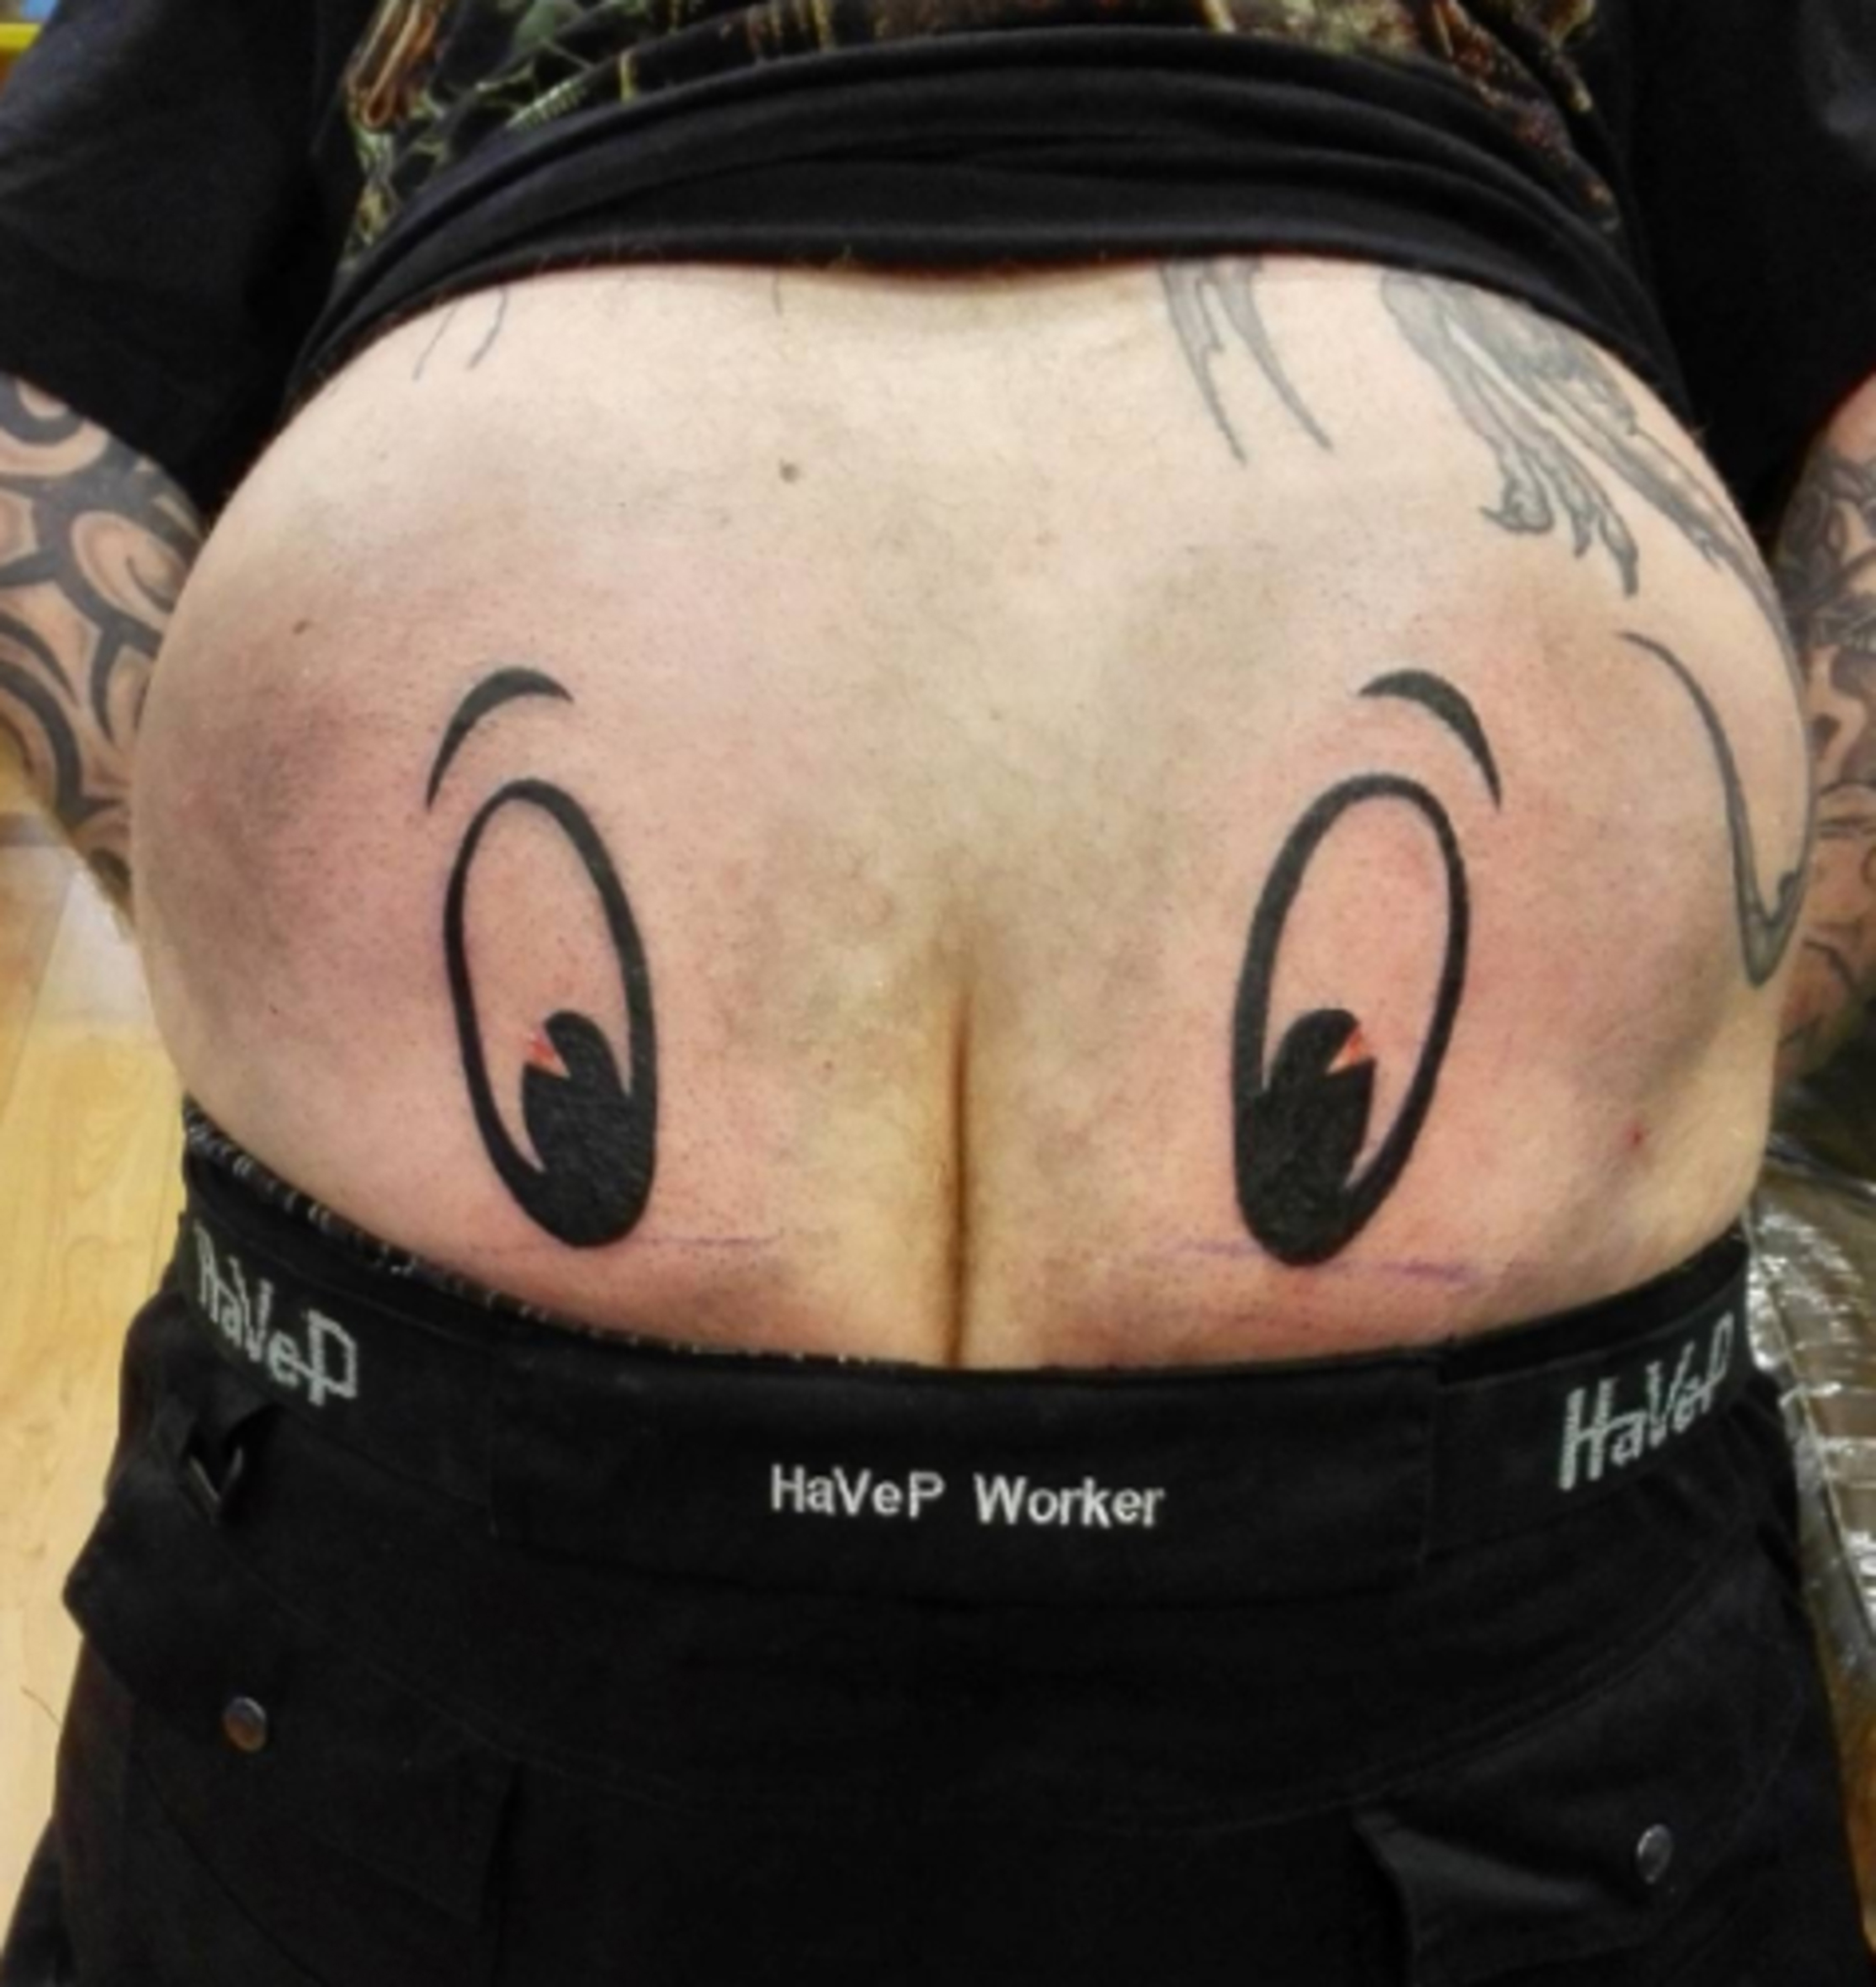 arturo caraballo recommends Funny Tattoos To Get On Your Bum